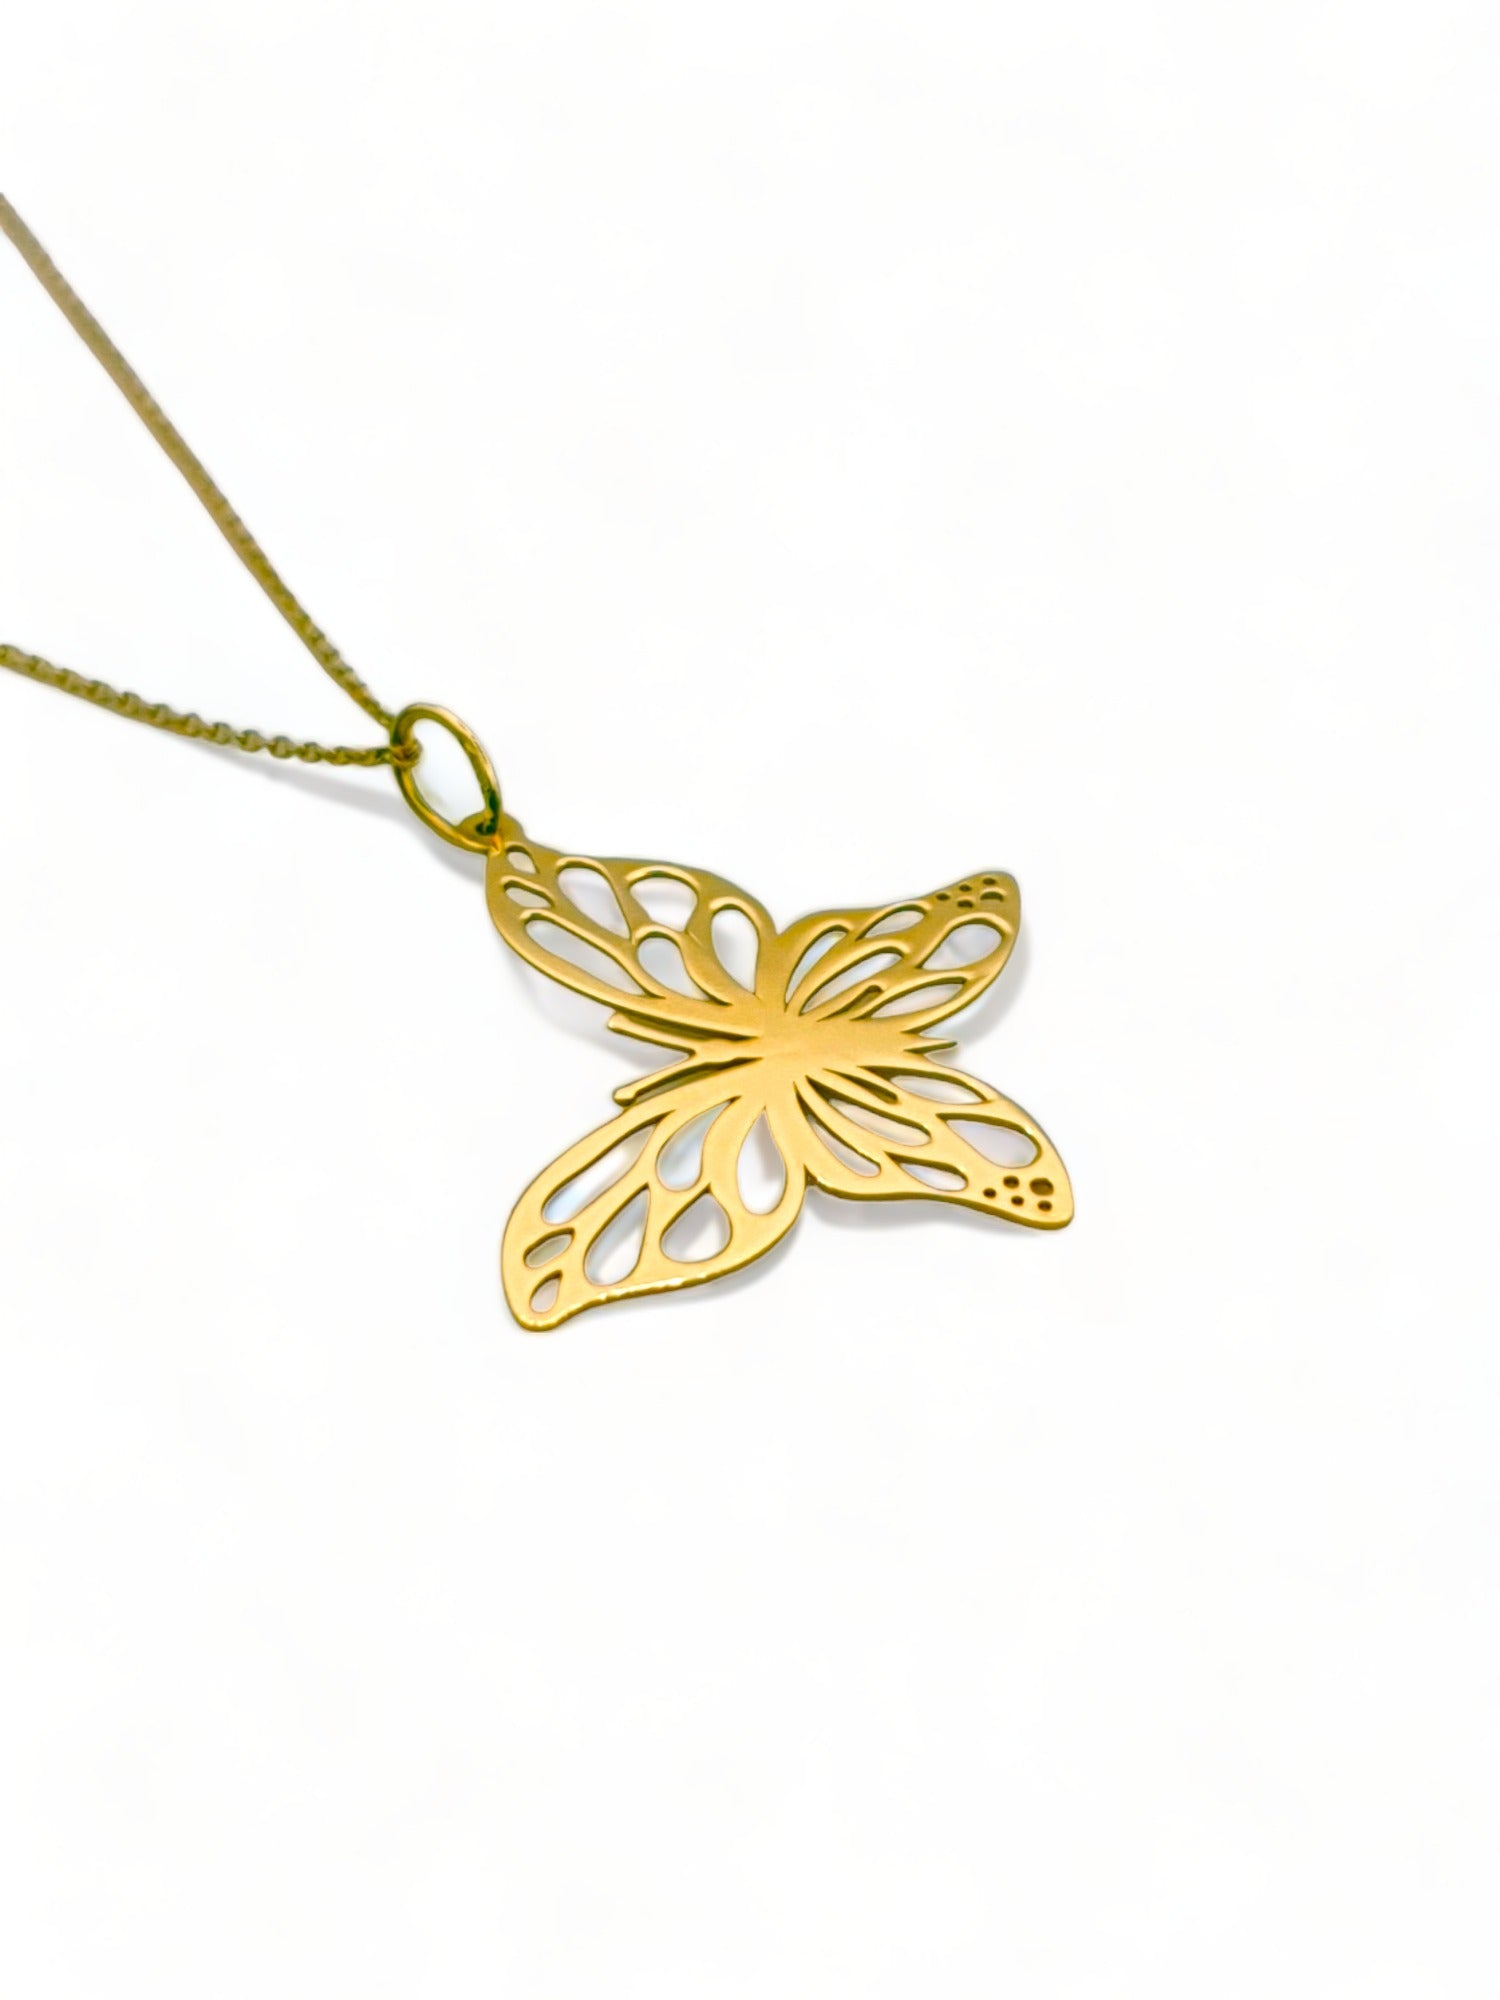 Solid 18ct gold women's butterfly necklace